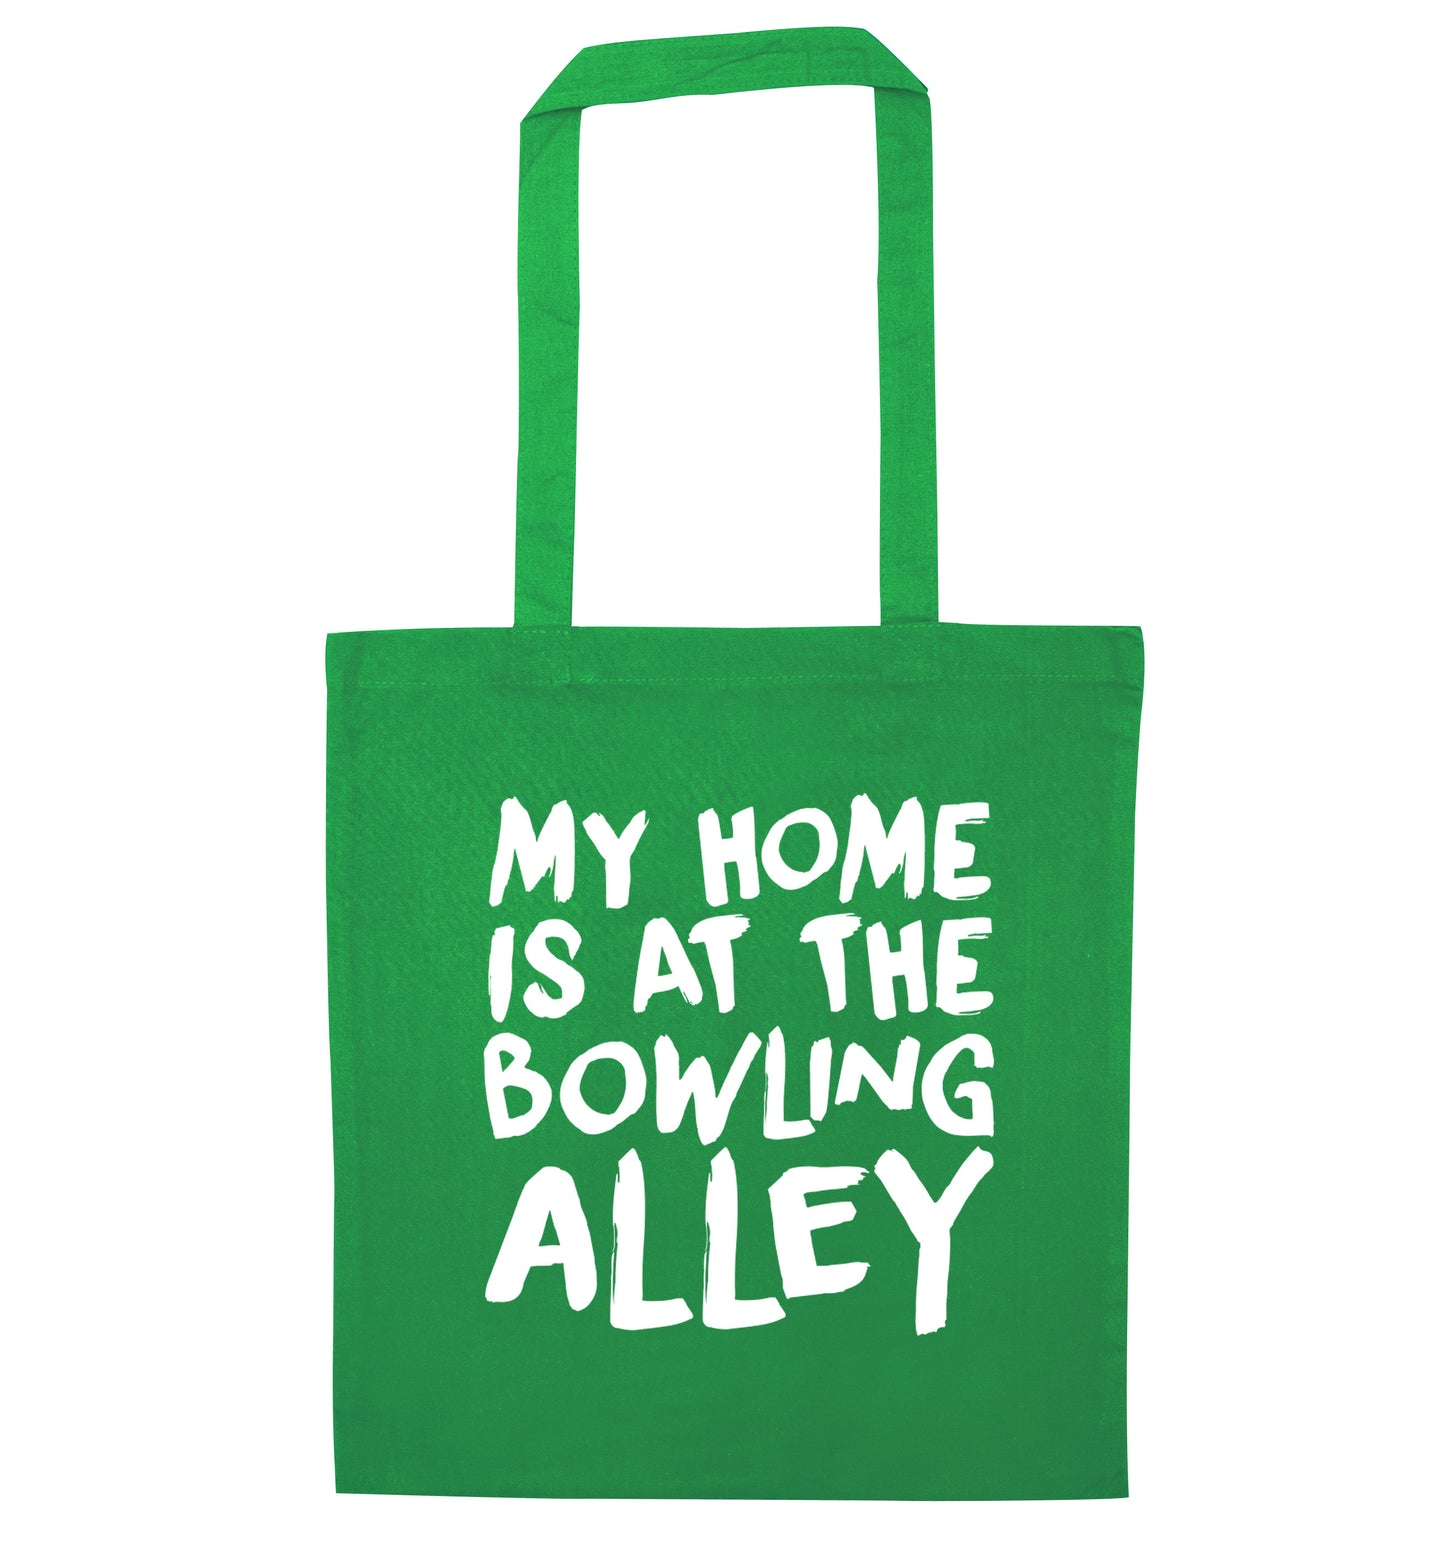 My home is at the bowling alley green tote bag